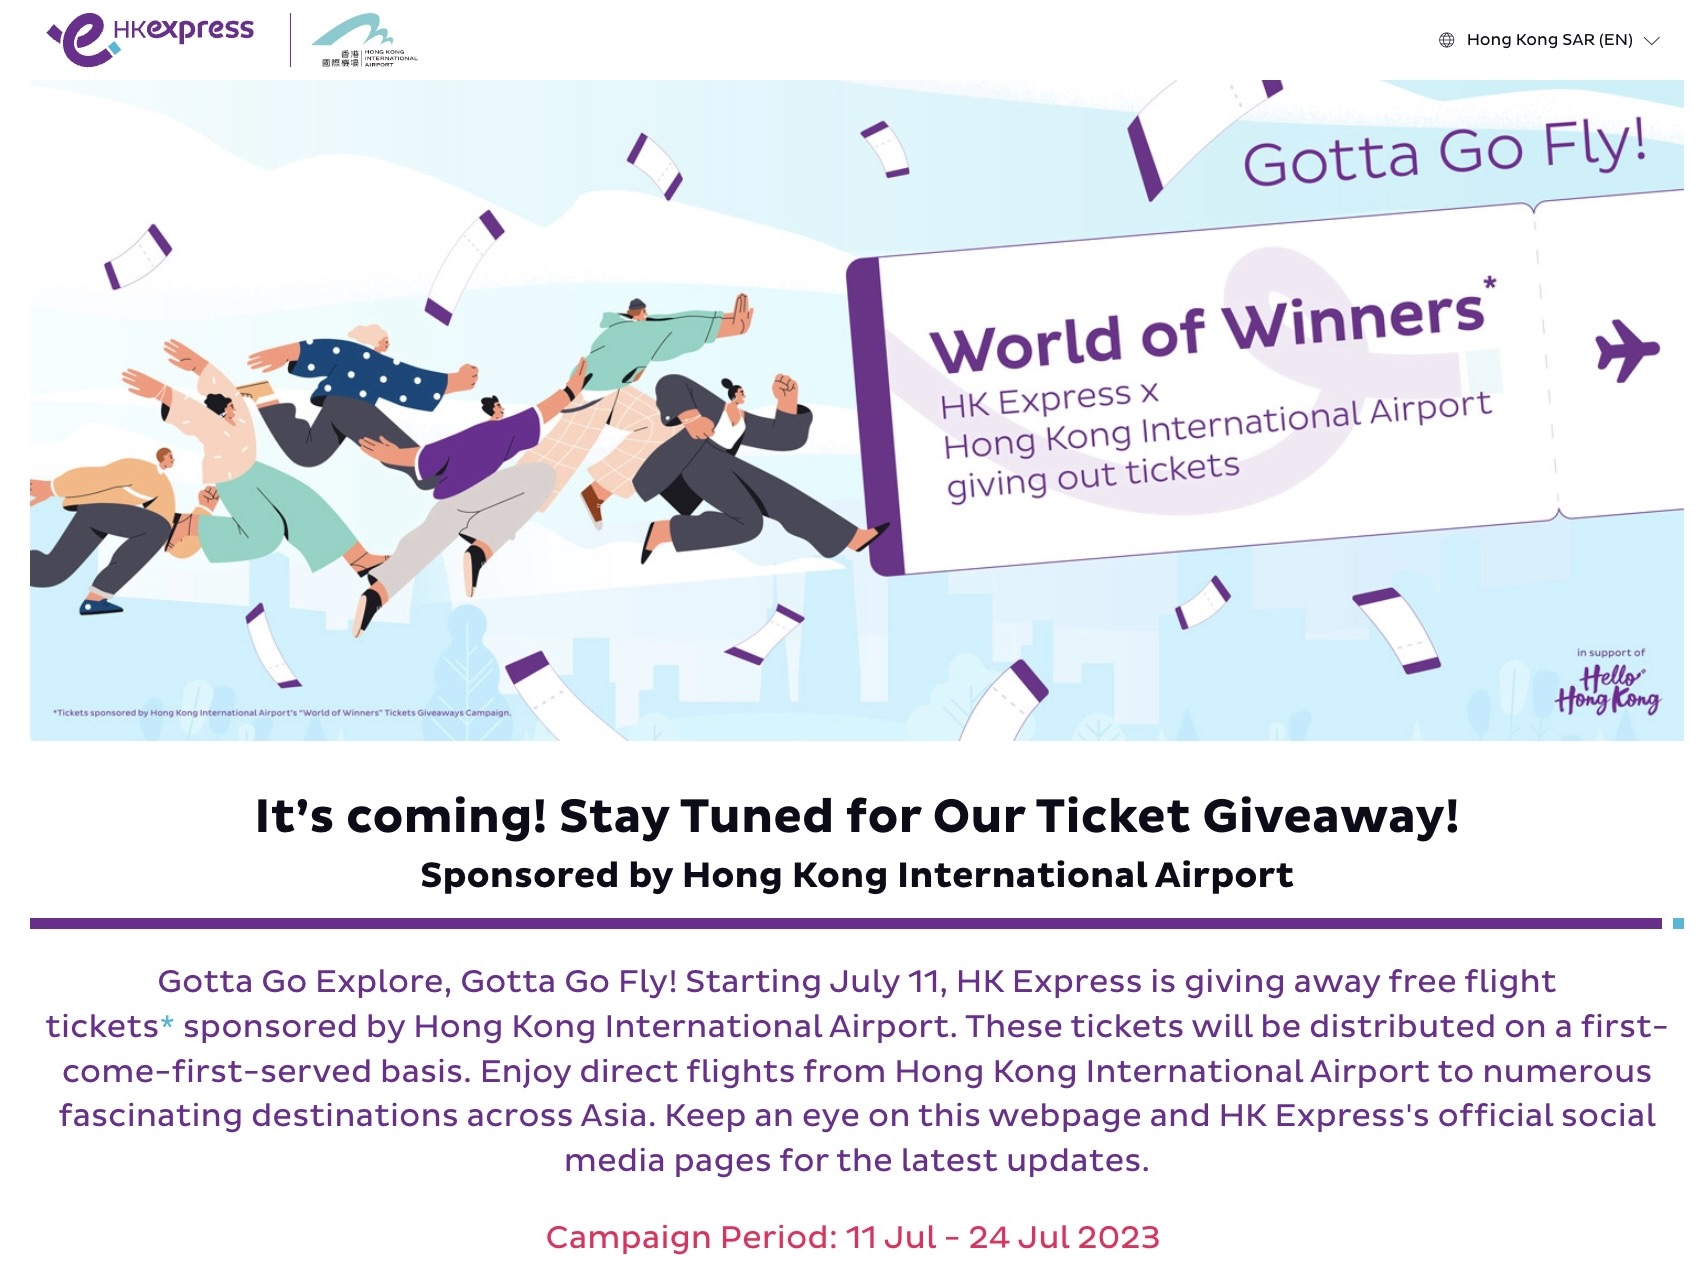 A screenshot from the HK Express campaign page stating that the airline will give away free tickets to passeners from Hong Kong from July 11-24.